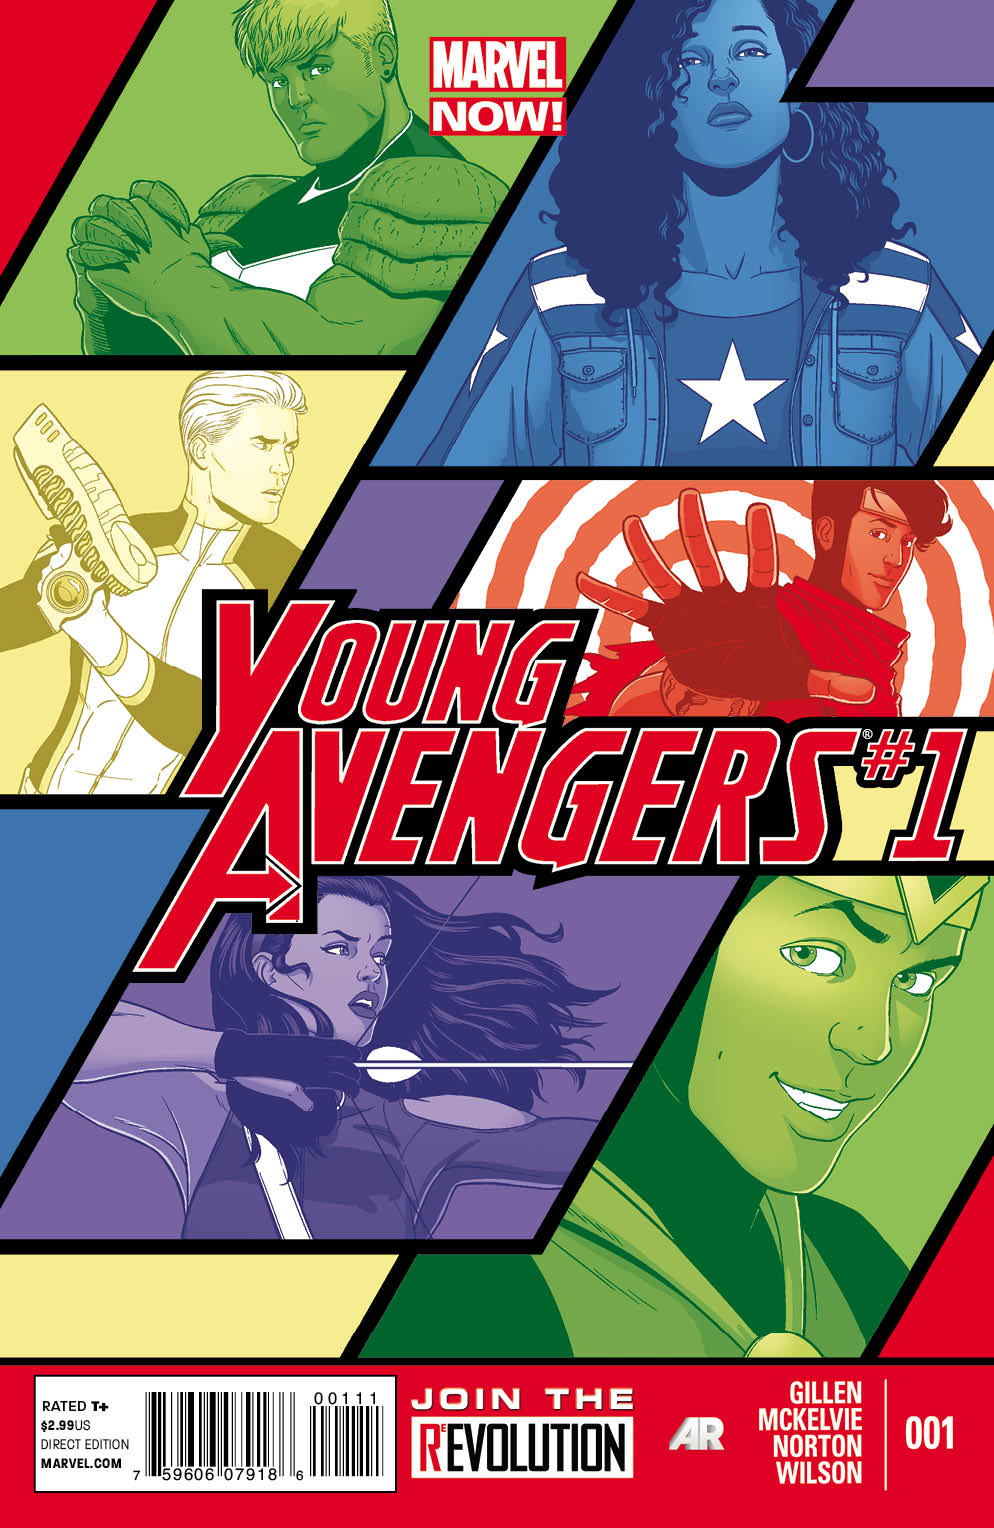 YOUNG AVENGERS #1